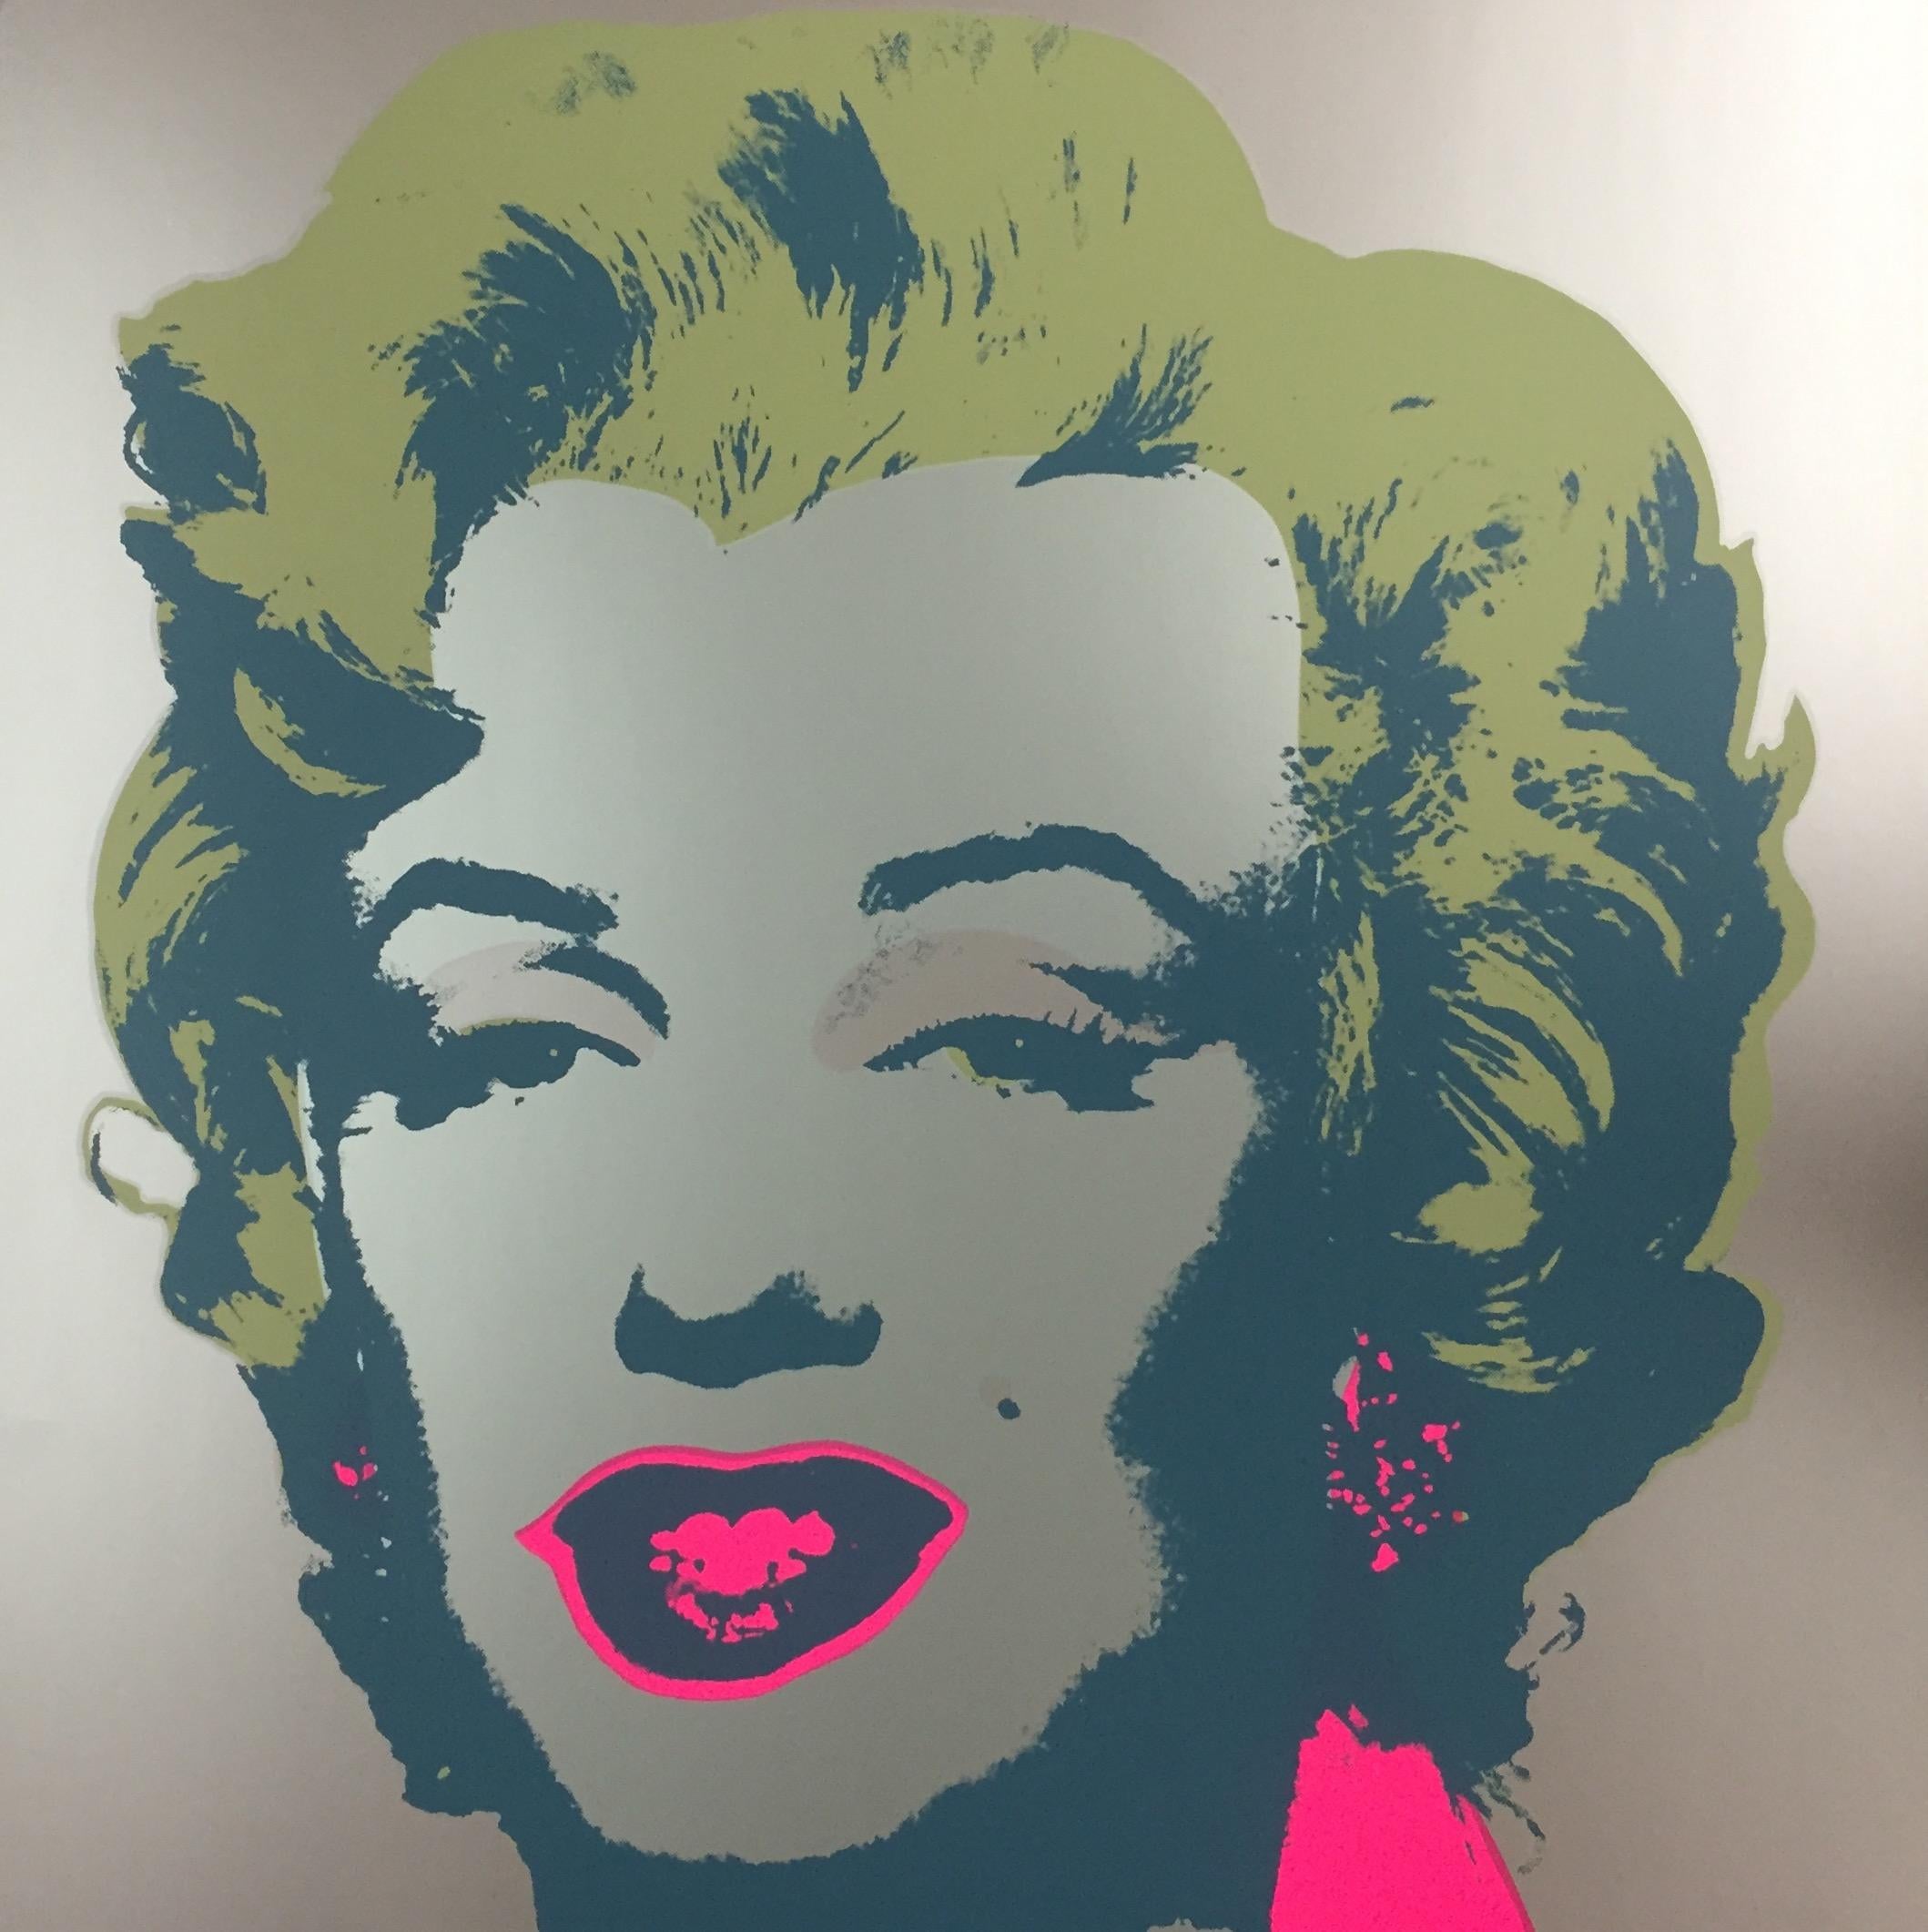 Marilyn Monroe 11.26 from the Sunday B. Morning Series - Print by Andy Warhol